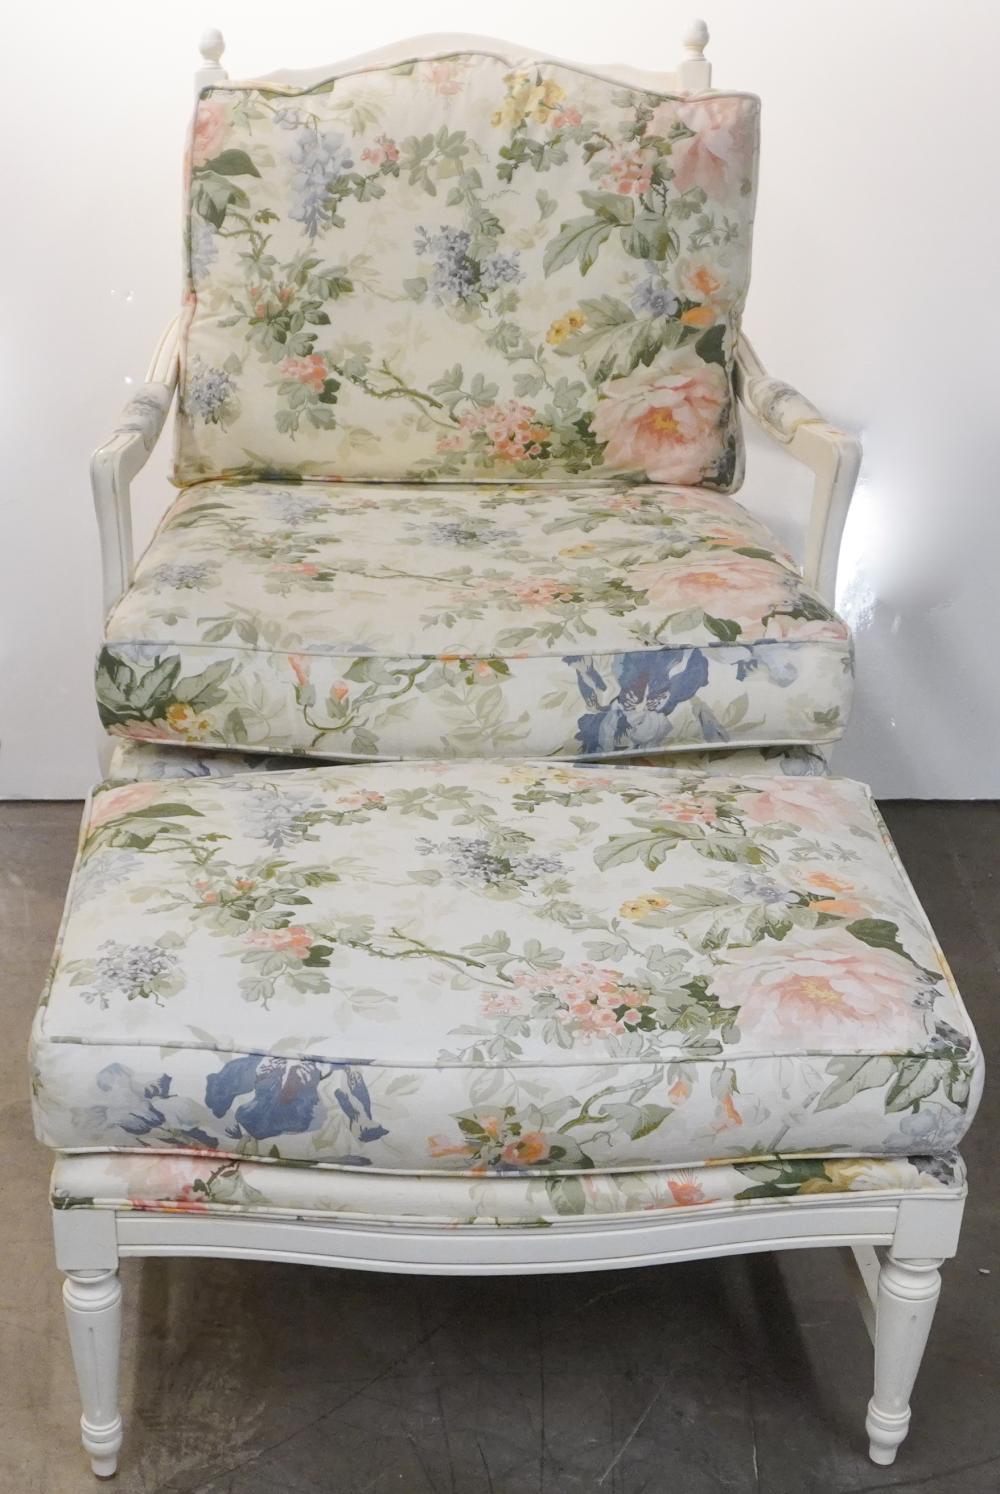 ETHAN ALLEN WHITE PAINTED AND FLORAL 2e7ea4